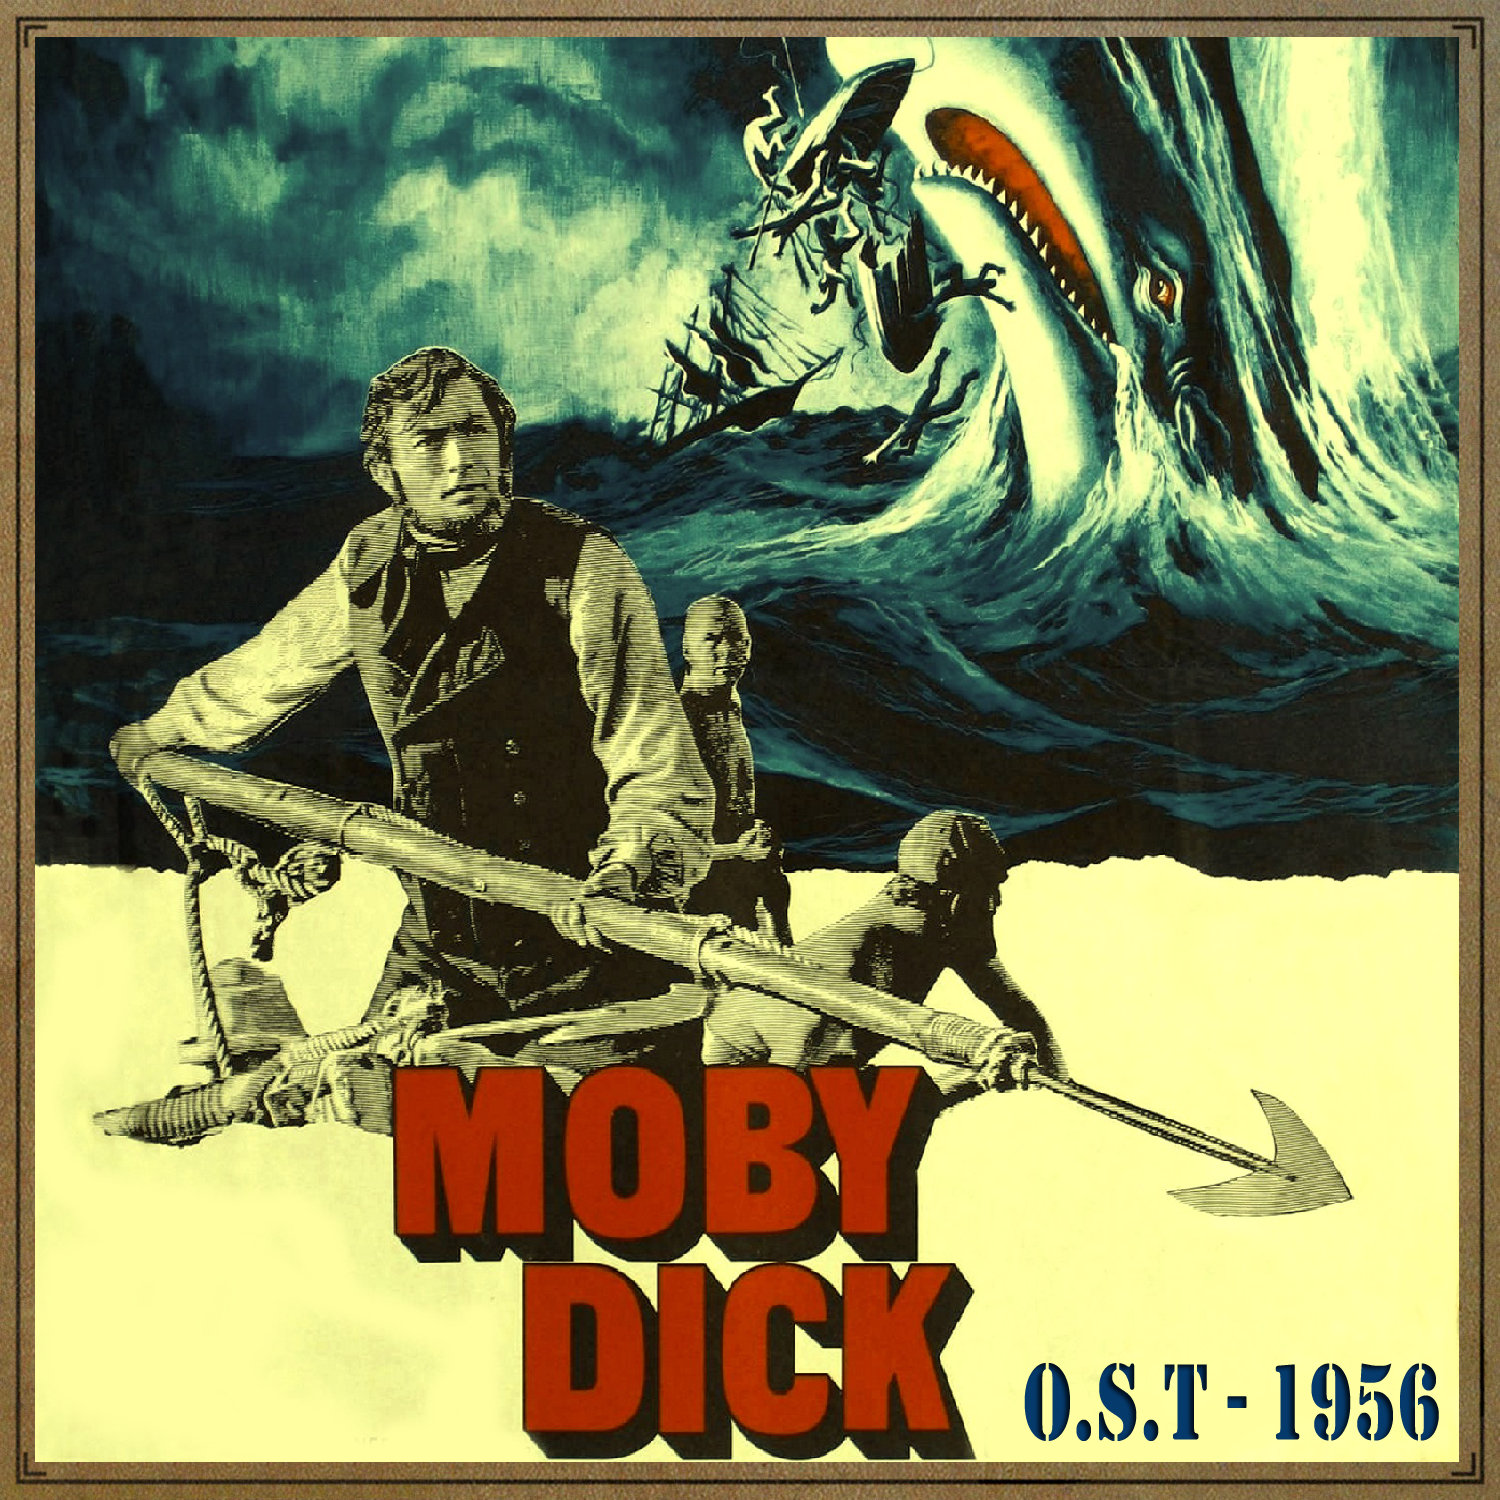 Moby dick ost